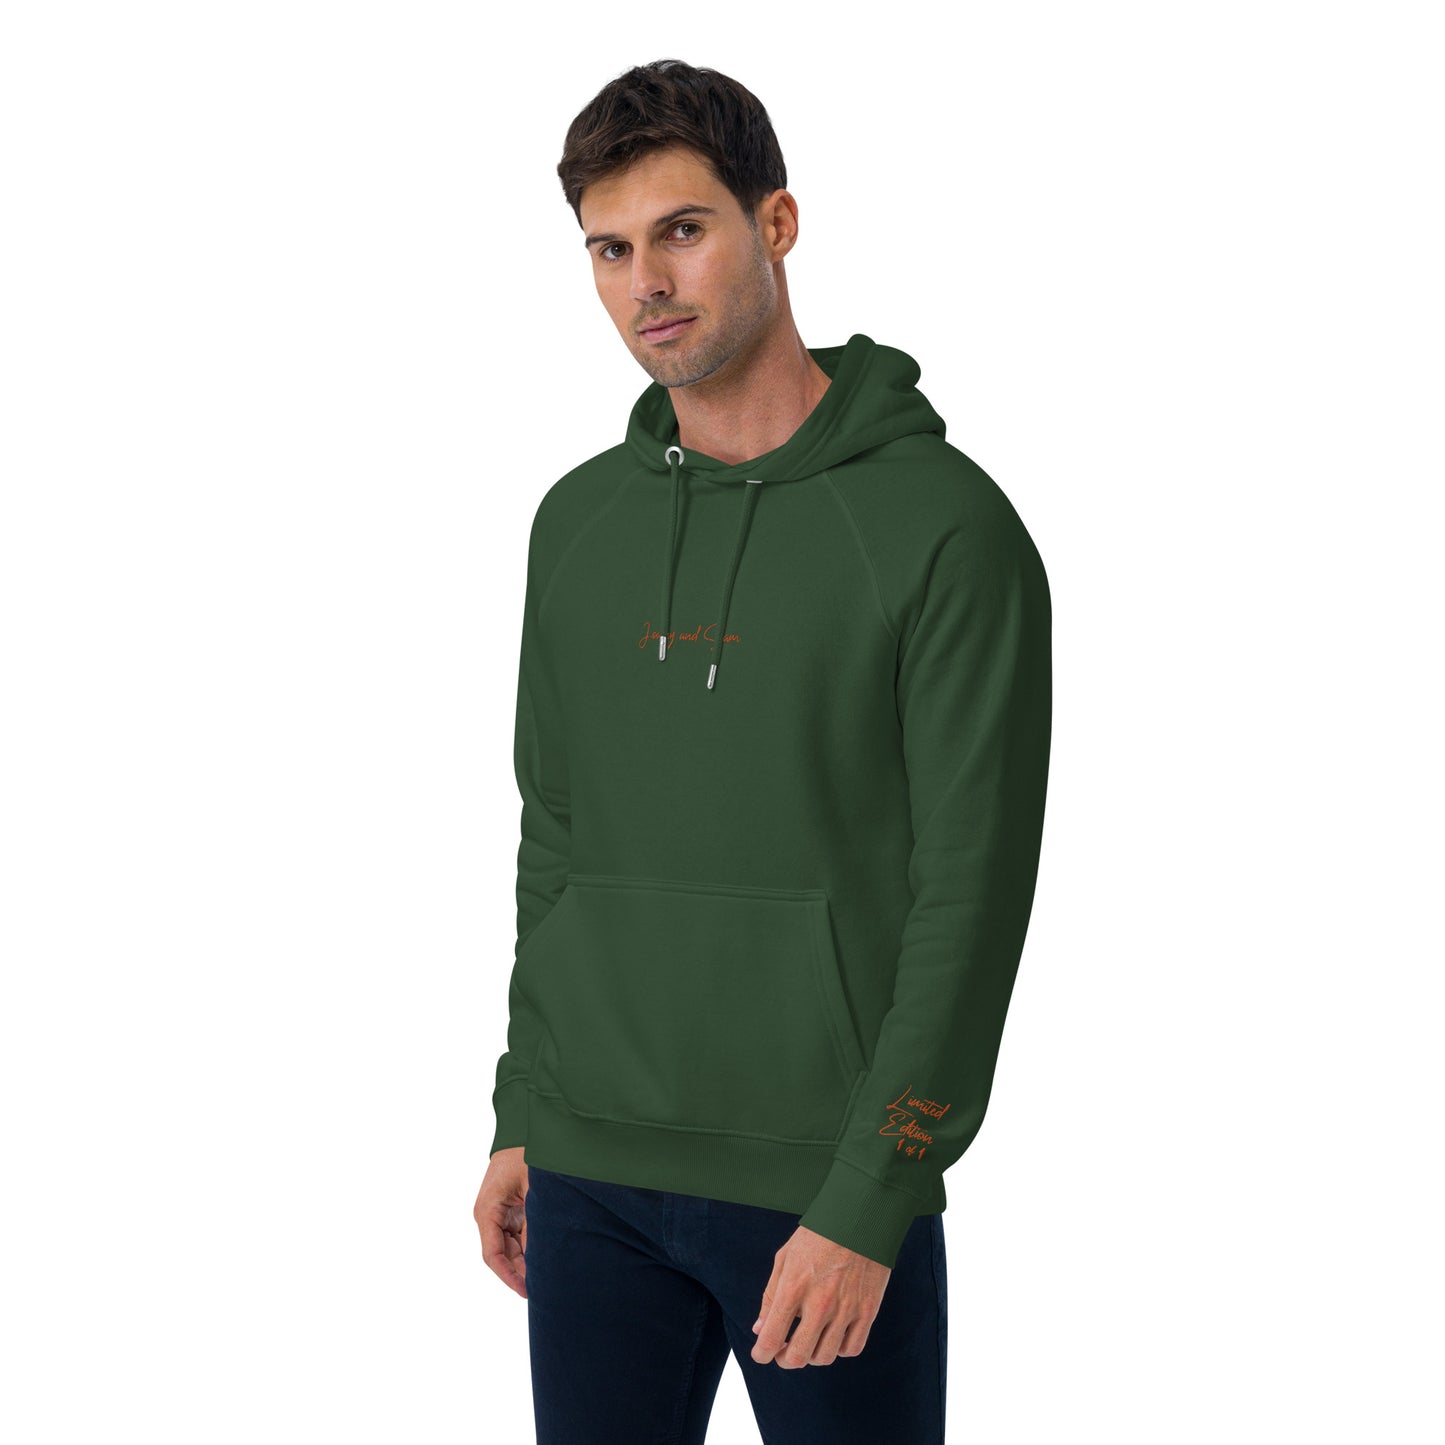 Jonny and Sam eco hoodie - Limited Edition 1 of 1